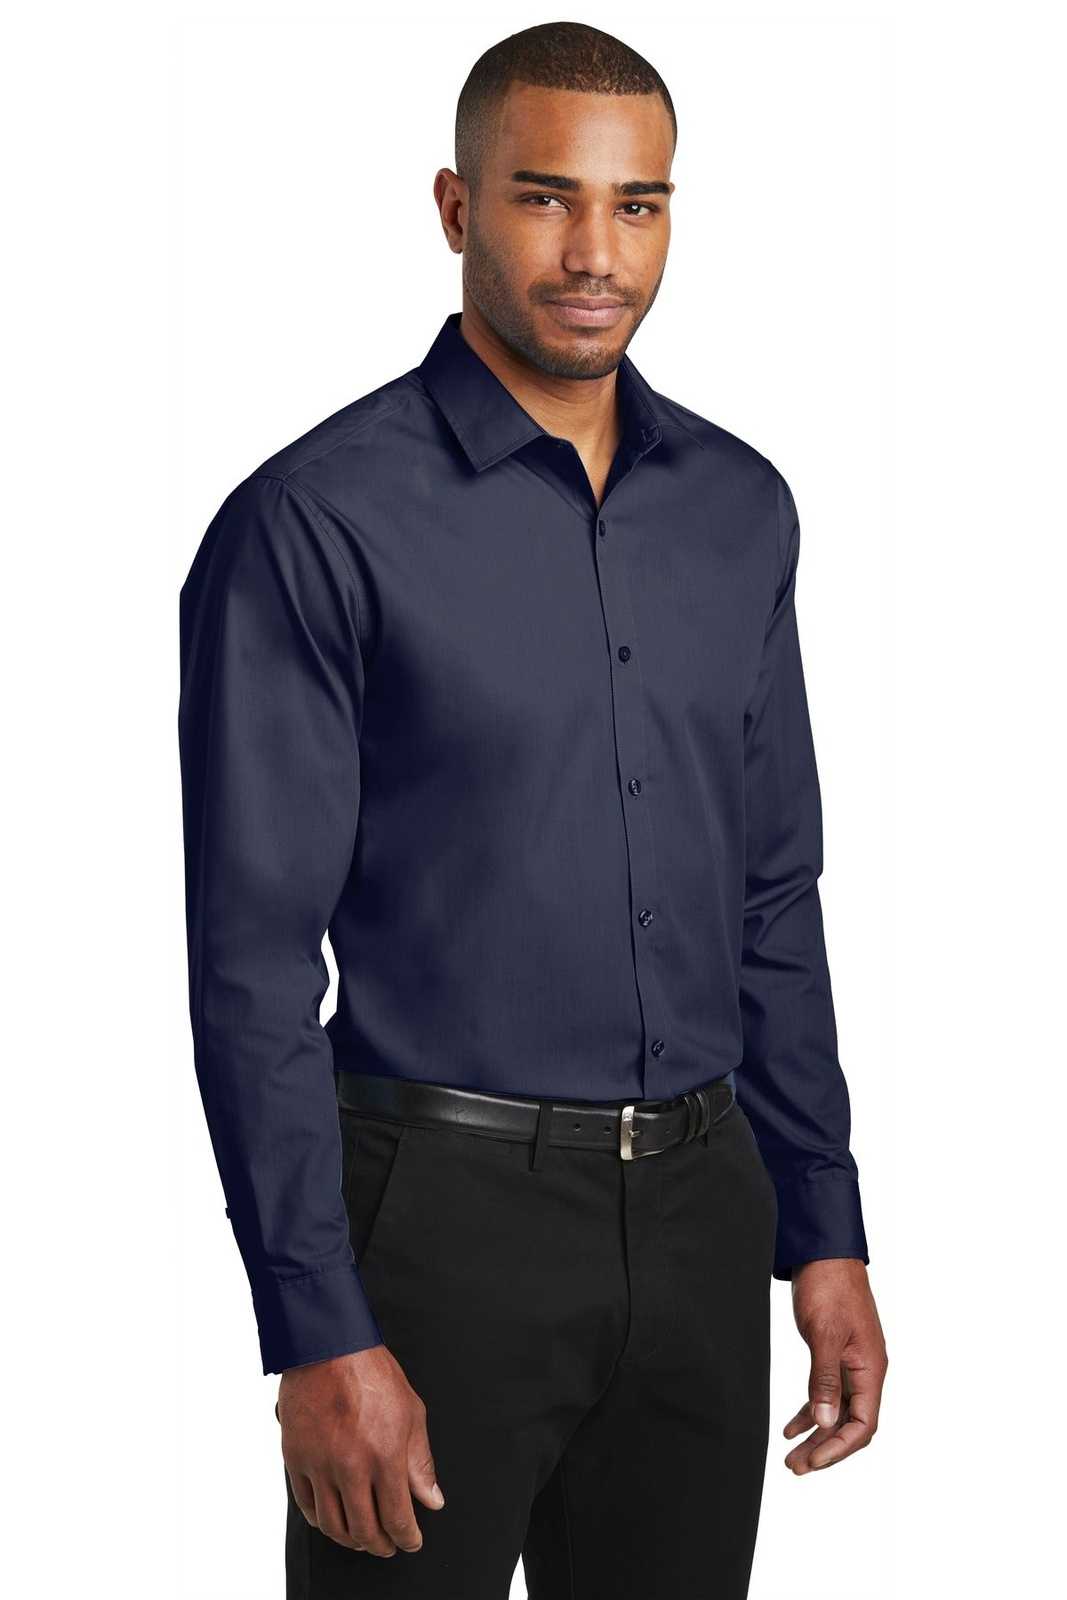 Port Authority W103 Slim Fit Carefree Poplin Shirt - River Blue Navy - HIT a Double - 4